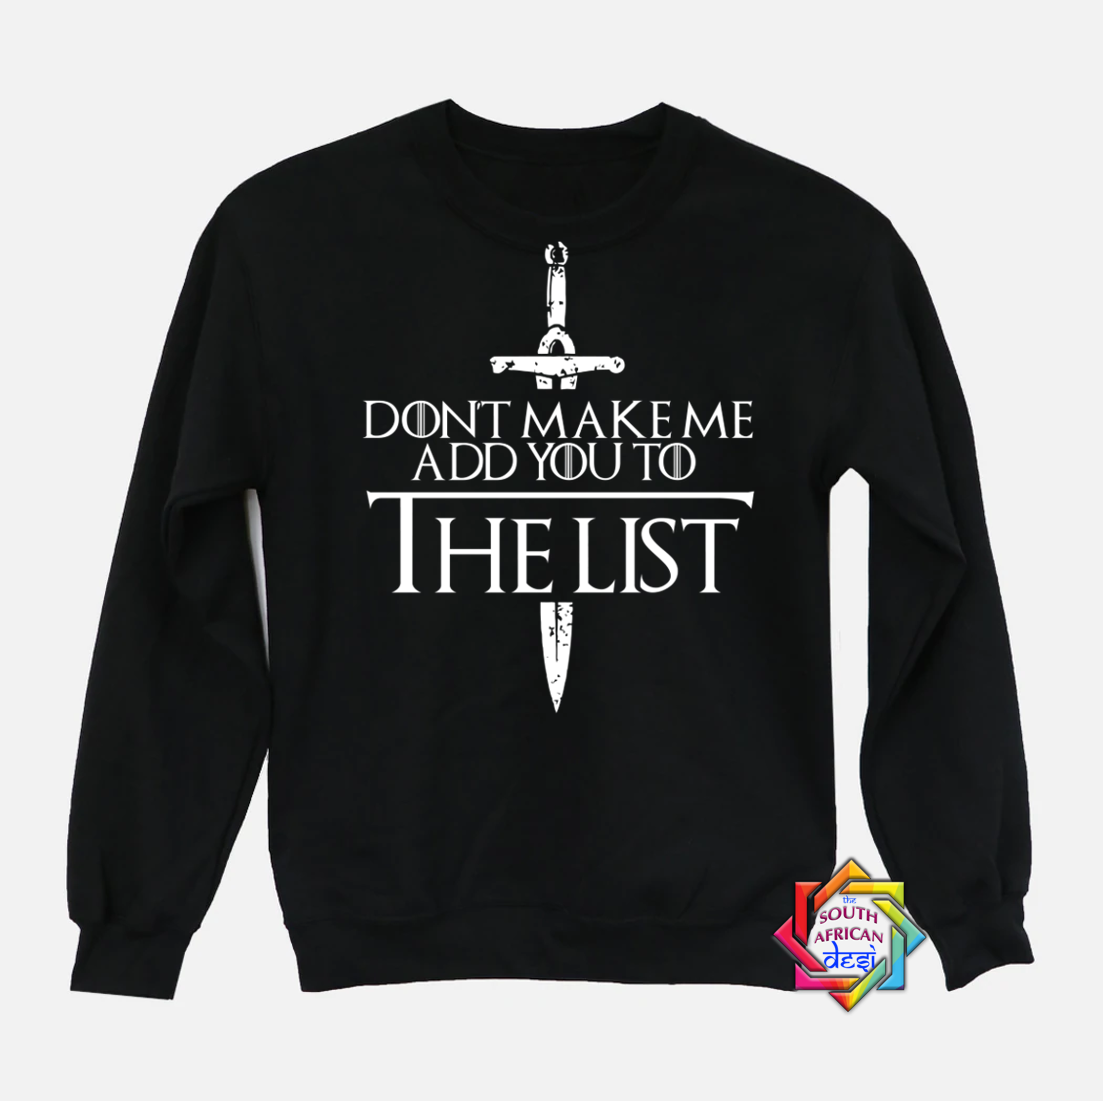 DON'T MAKE ME ADD YOU TO THE LIST | GAME OF THRONES INSPIRED | HOODIE/SWEATER | UNISEX